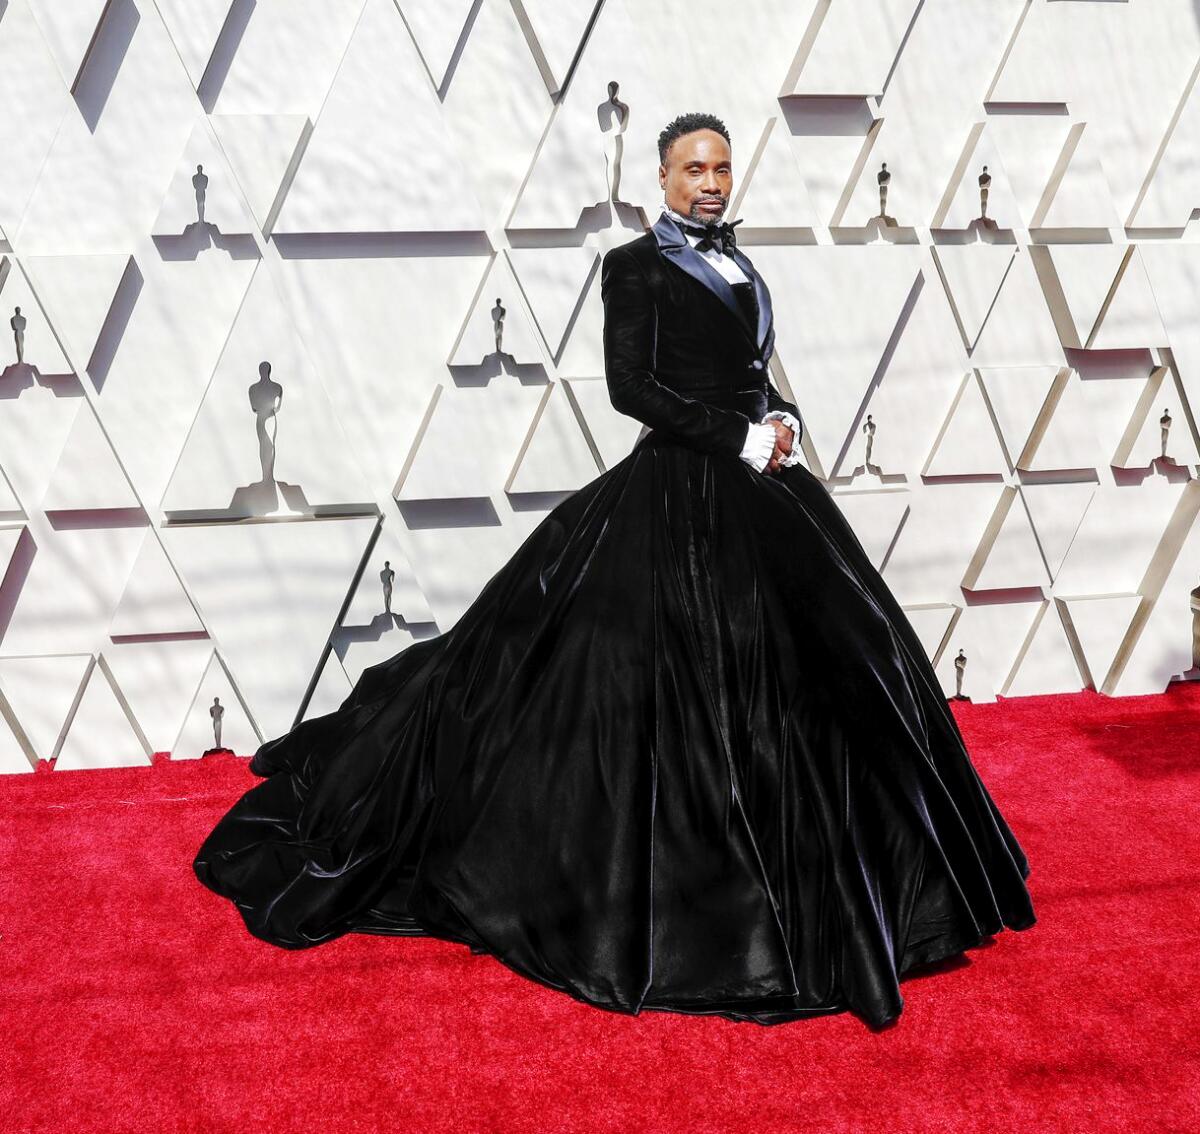 At the 2019 Oscars, Billy Porter wears a custom Christian Siriano creation that deftly melds the most striking elements of men's and women's formalwear.